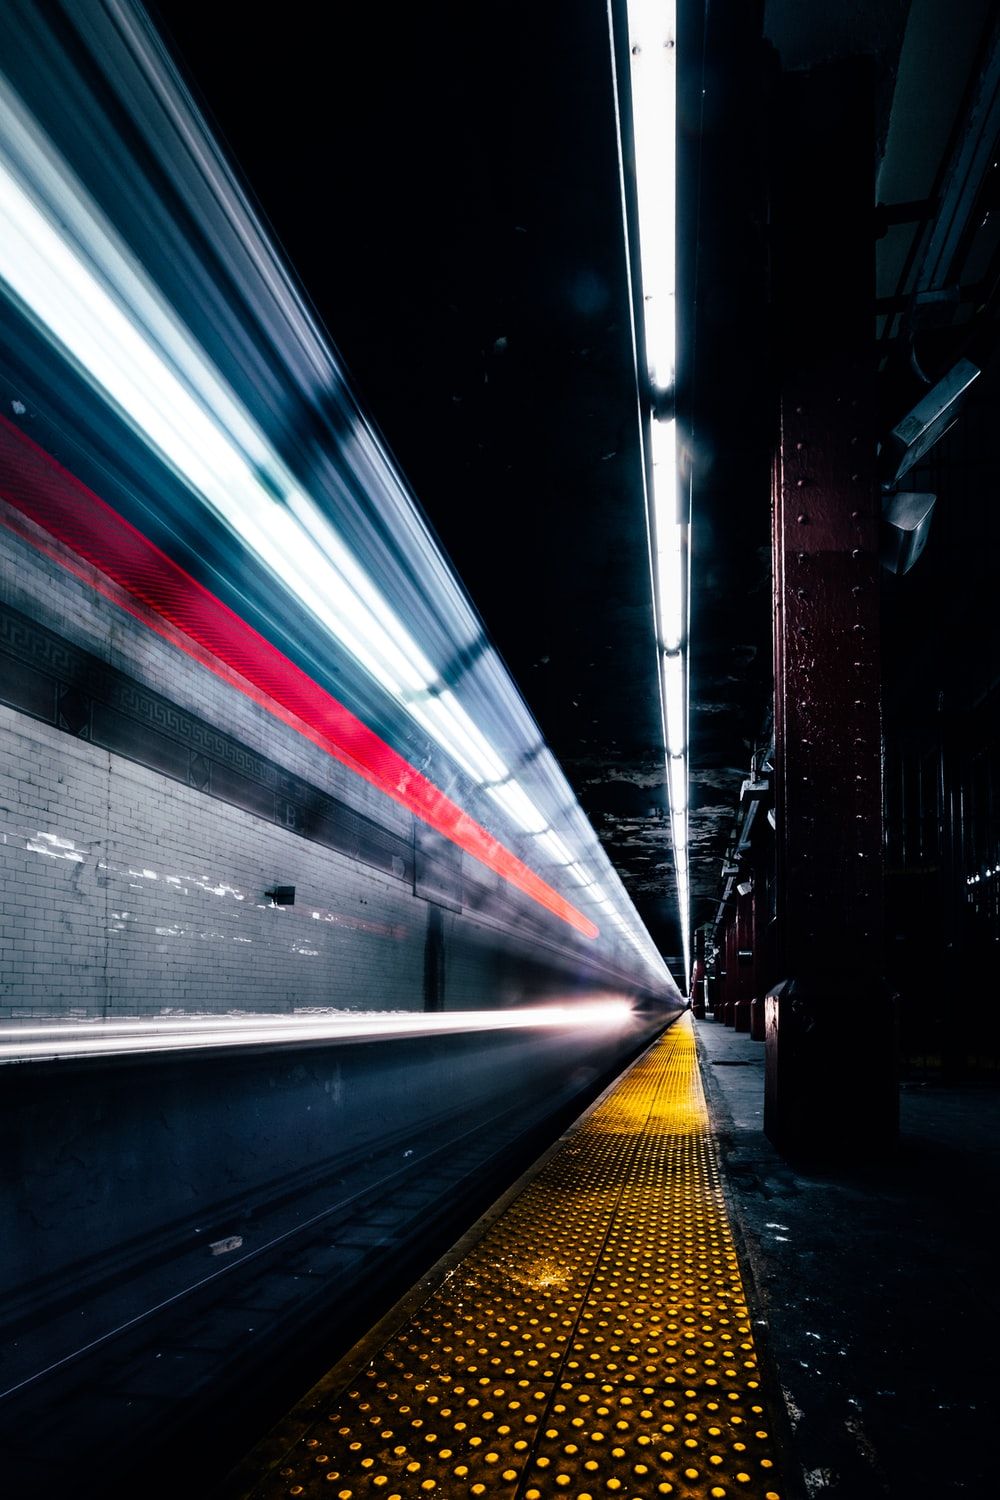 Night Train Picture. Download Free Image